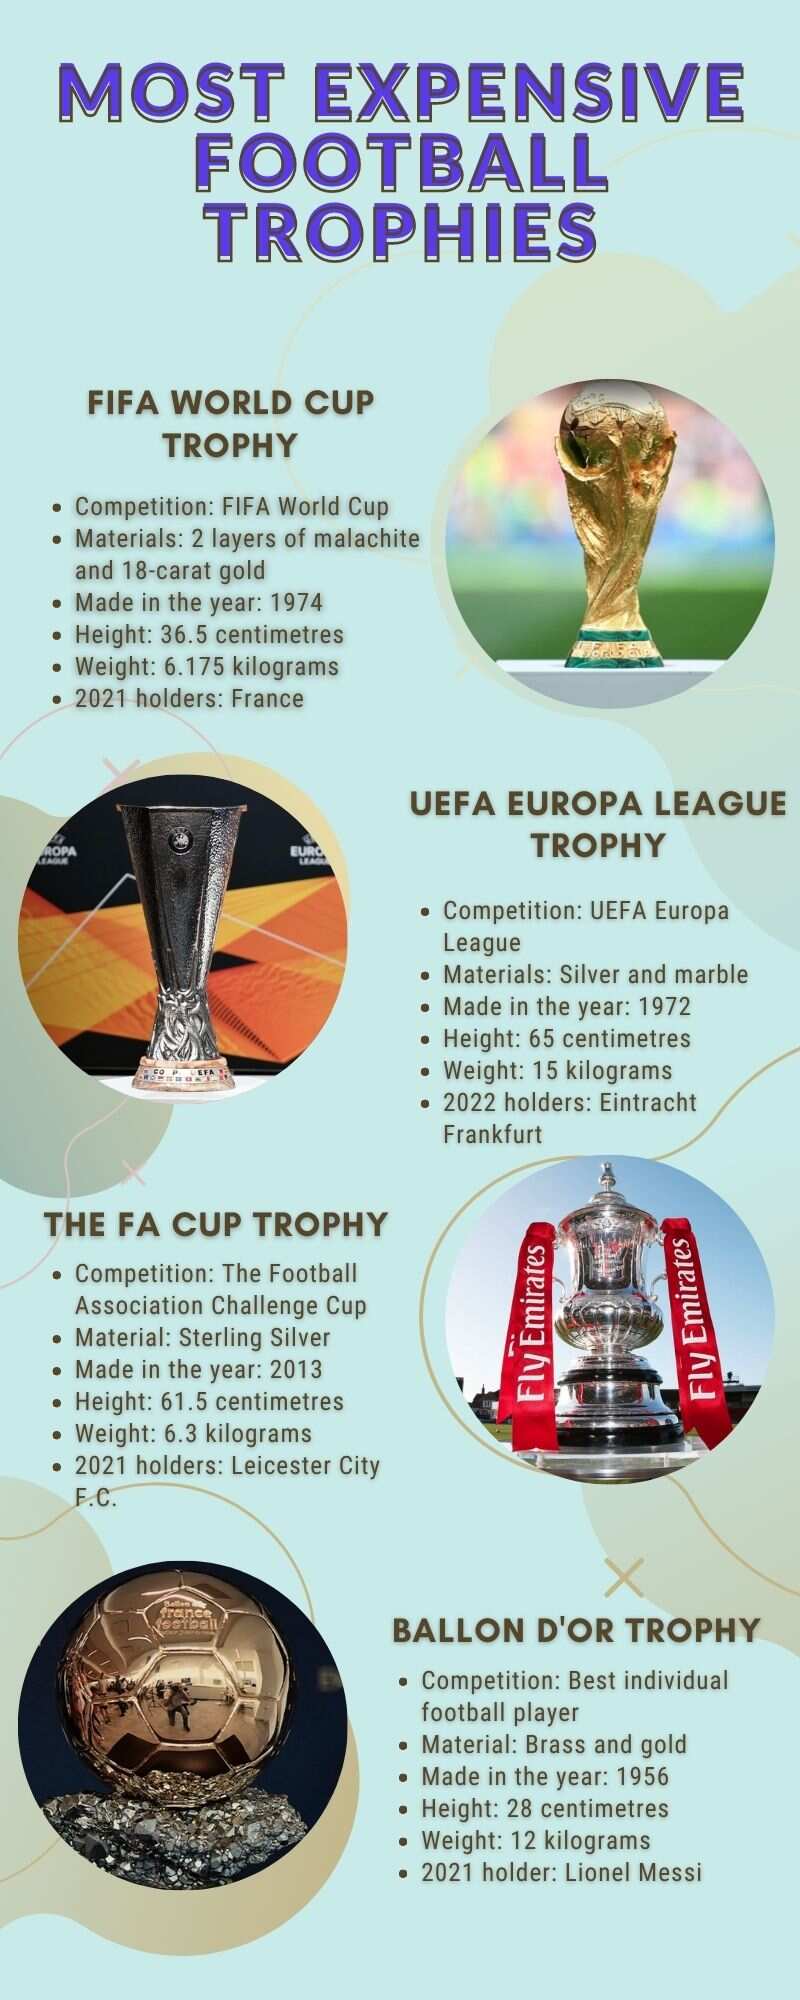 Most expensive football trophies